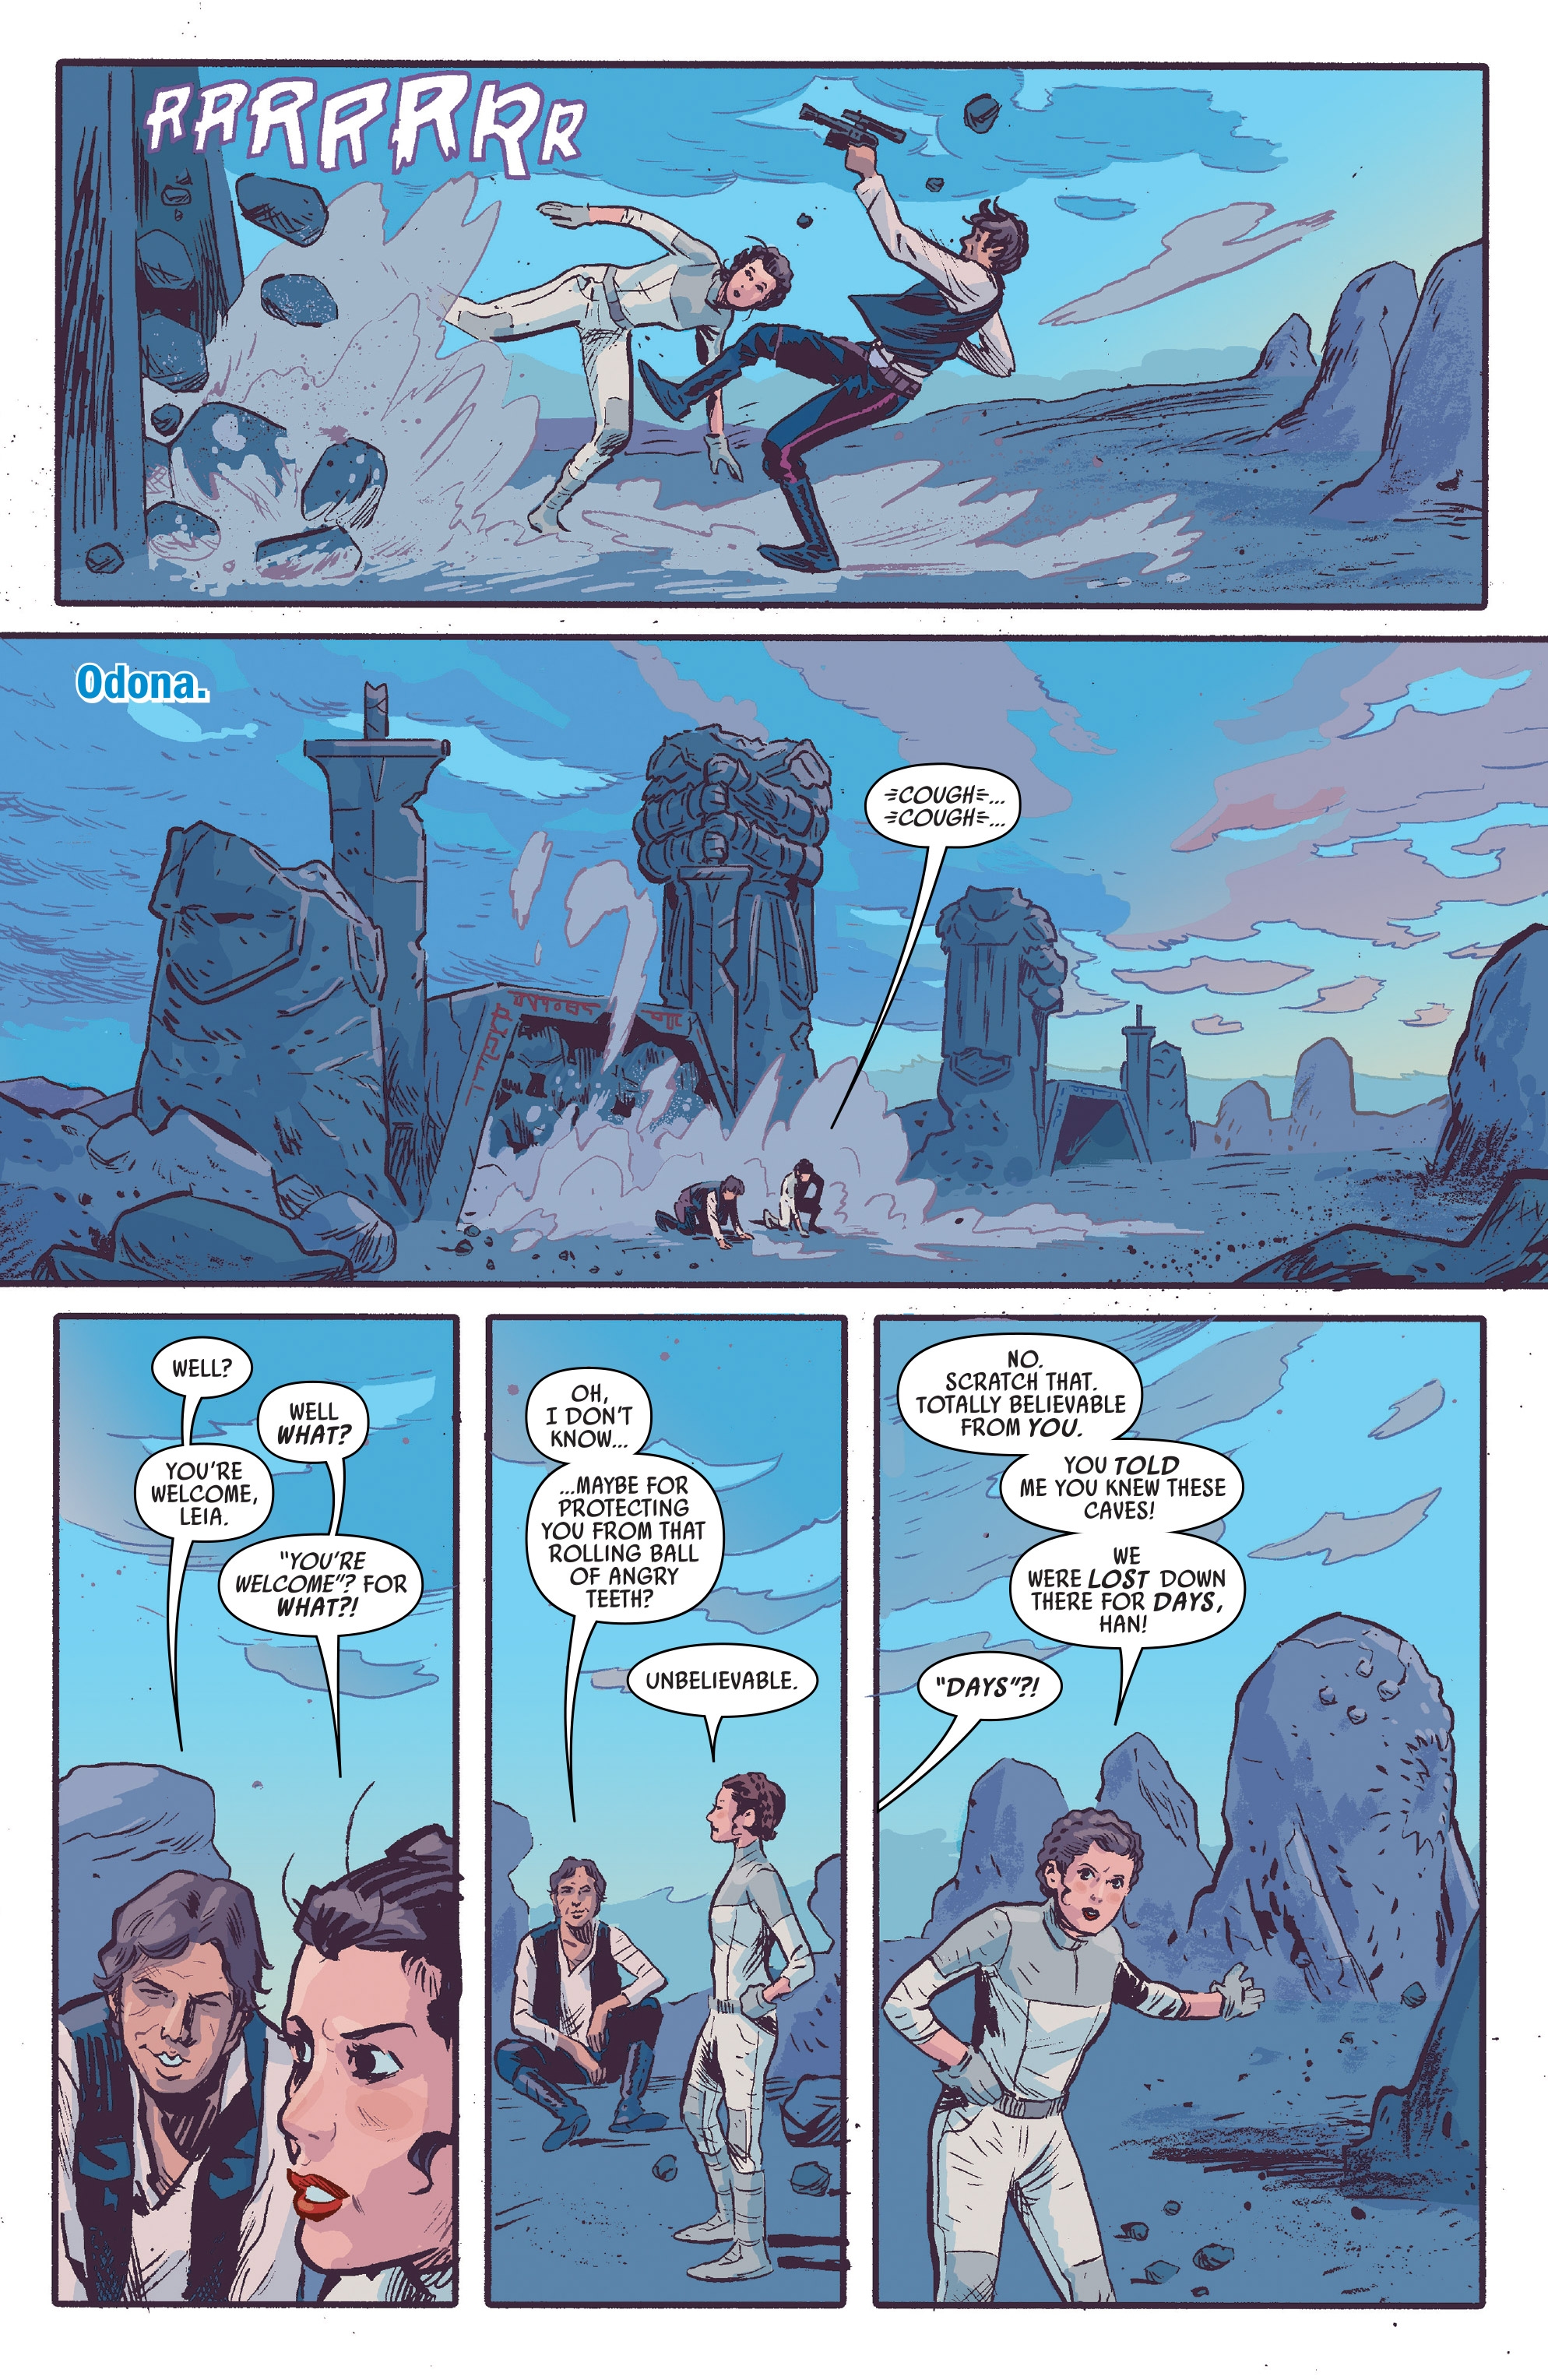 Star Wars (2015-): Chapter Annual-3 - Page 4